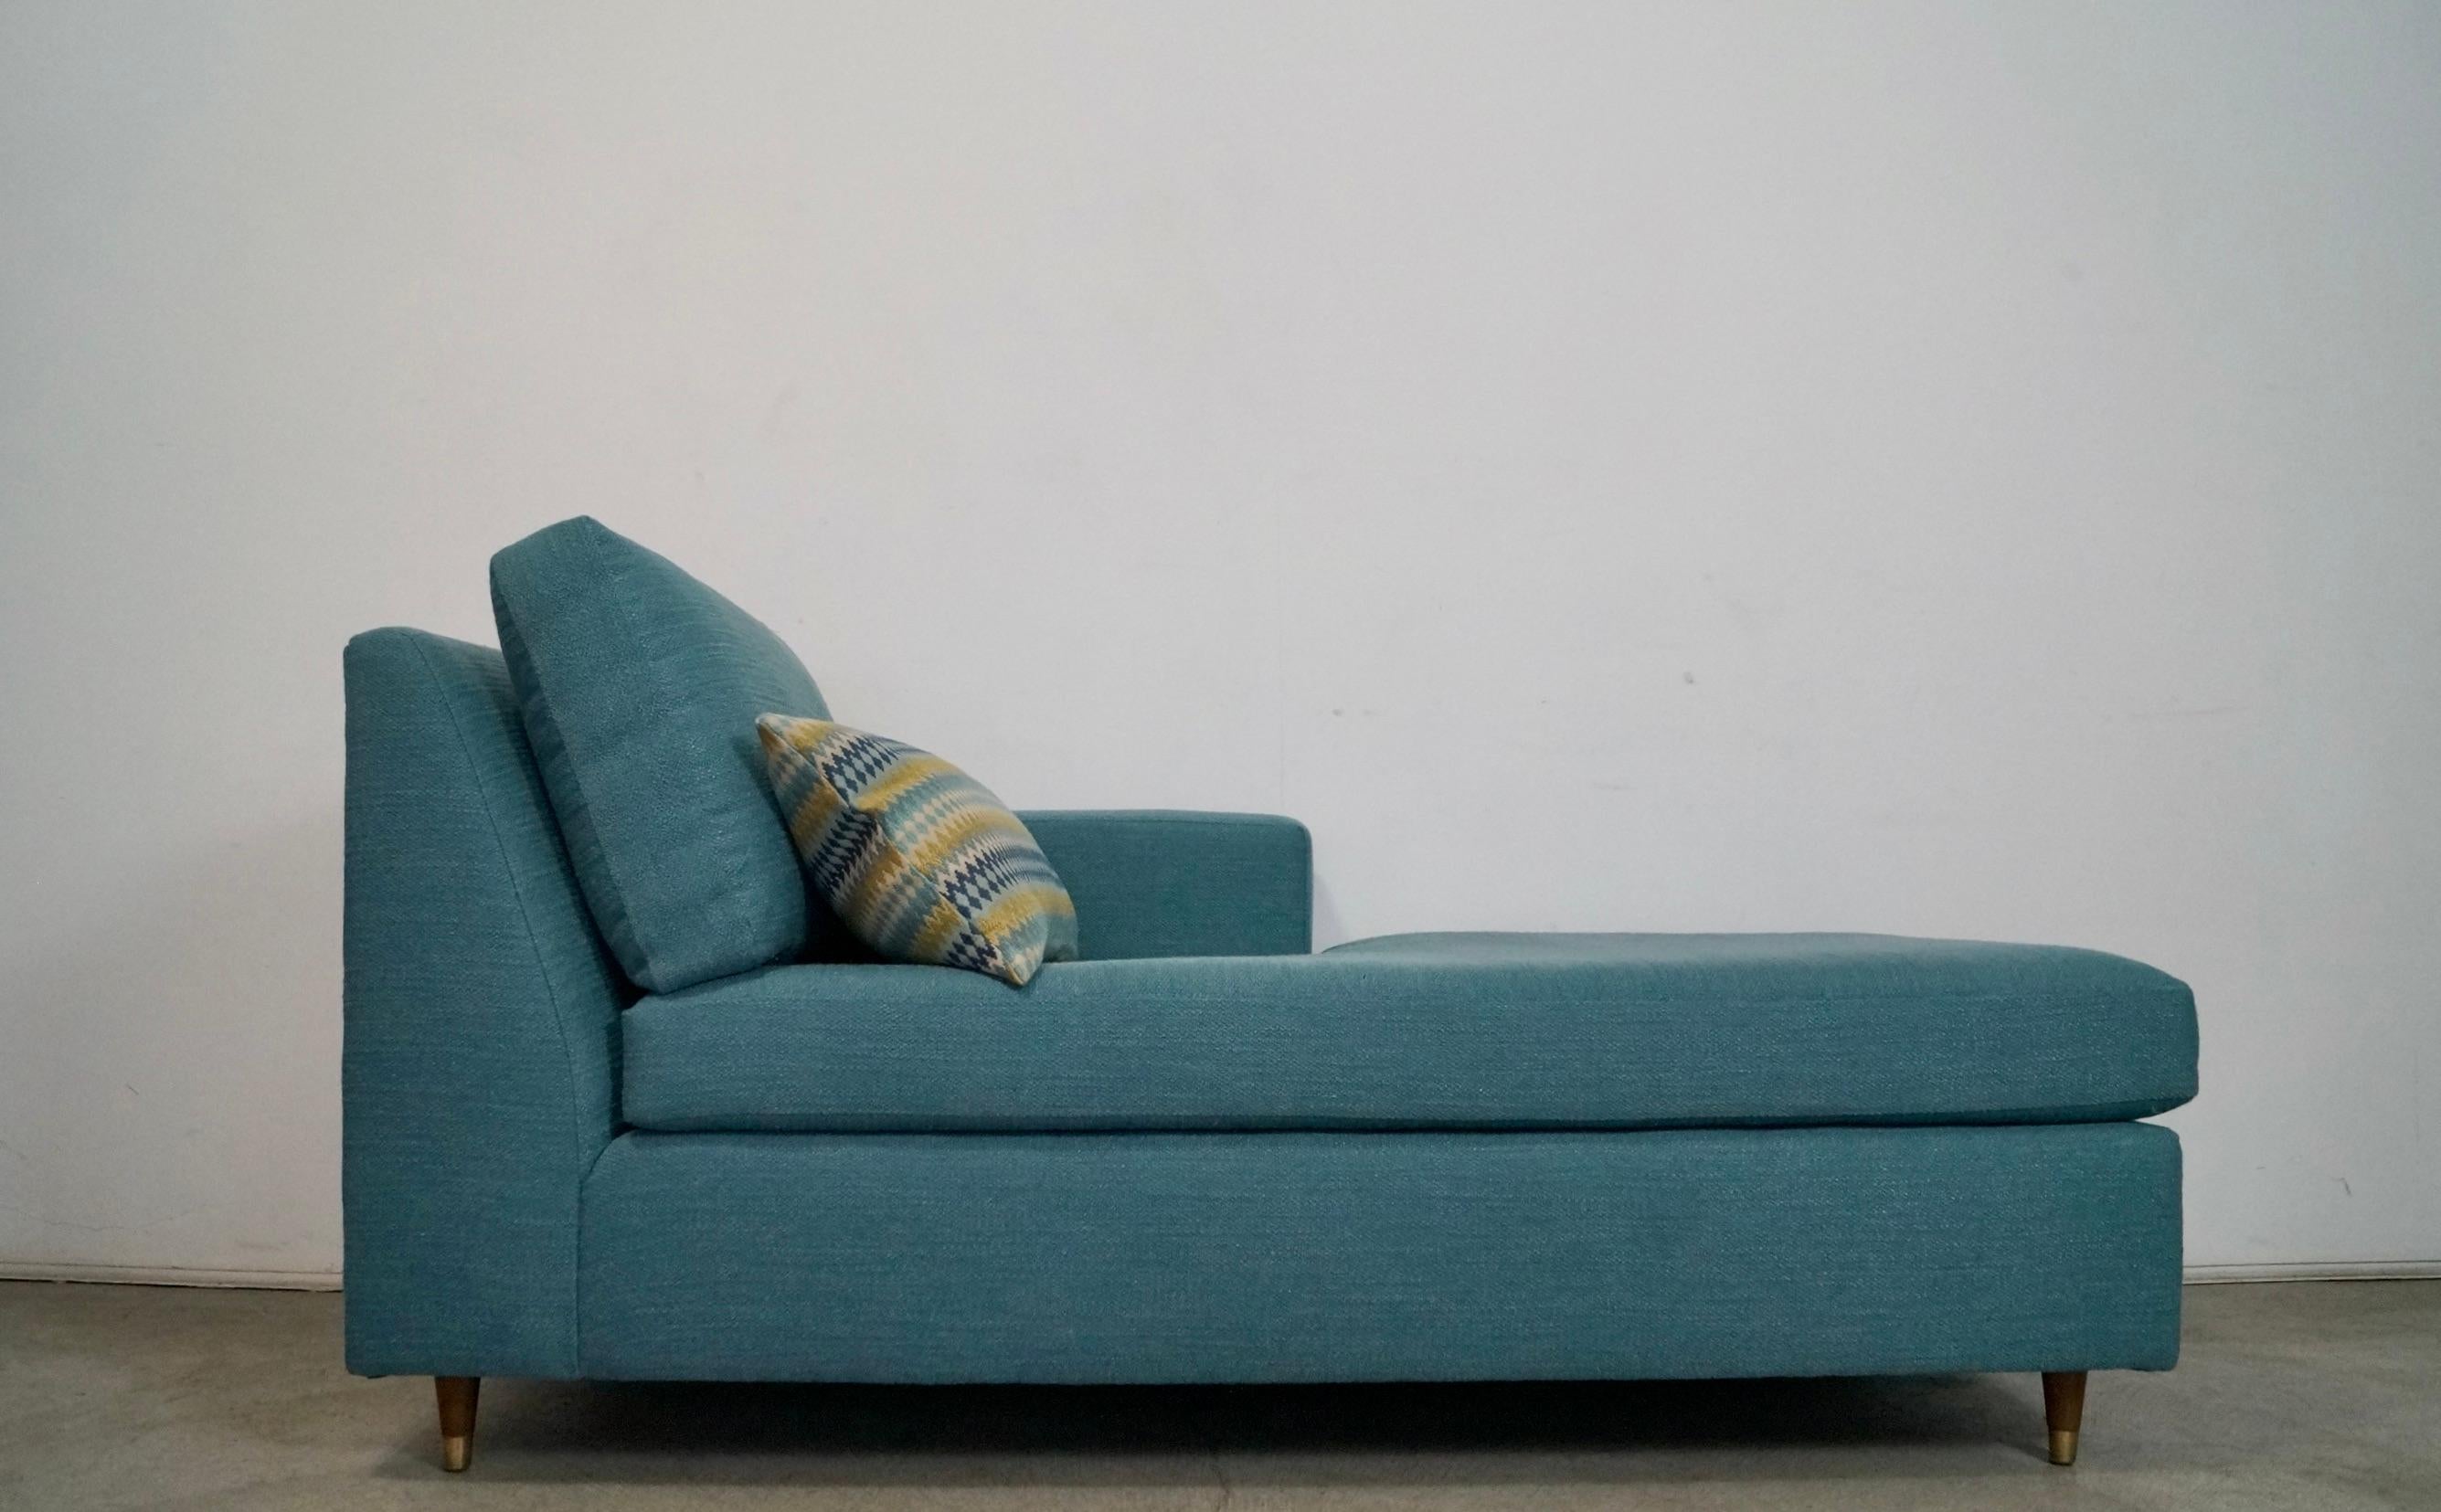 Vintage 1970's Mid century Modern daybed for sale. Has been professionally reupholstered in a teal textured nubby tweed with new foam. Great clean design and style with a back cushion and comes with a throw pillow that is down filled. Has an arm on